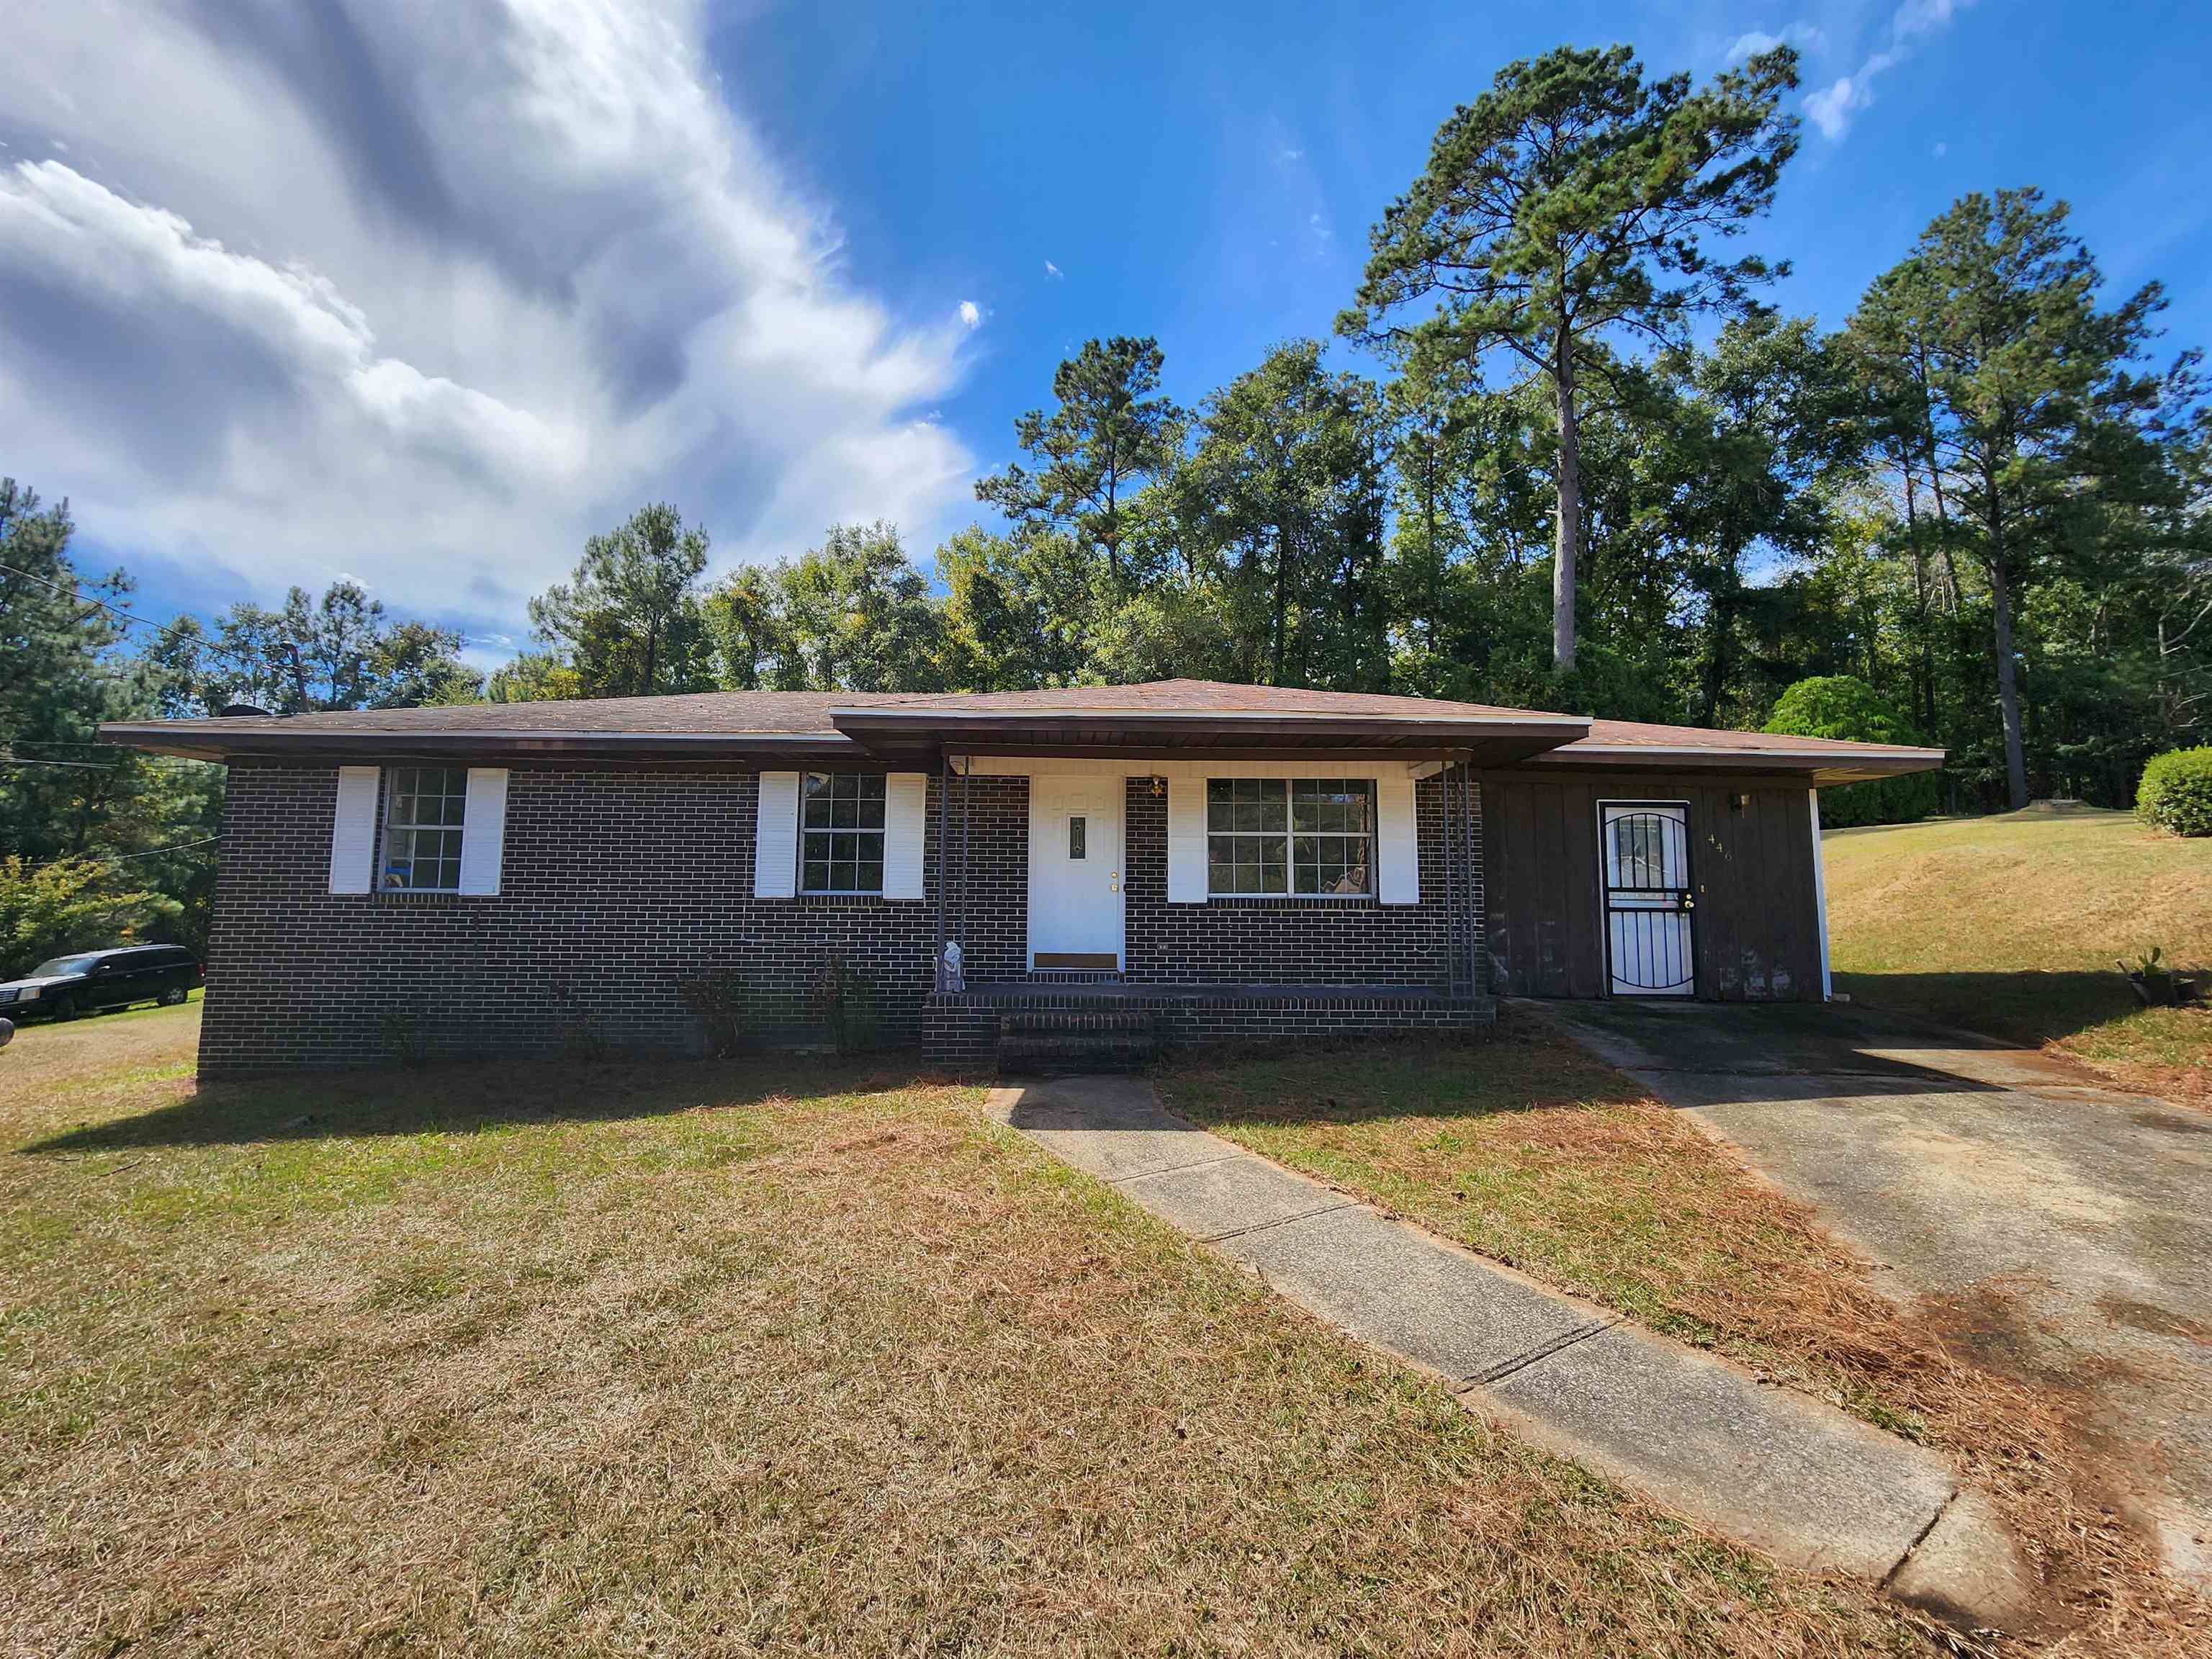 Pleasant and Quite Neighborhood, conveniently located off of US 90 in Quincy, FL minutes from downtown Quincy and few minutes from Tallahassee, FL. It sits on a .36-acre lot with 3 Bedrooms and a 1.5 Bath. Needs TLC.  Motivated Seller.